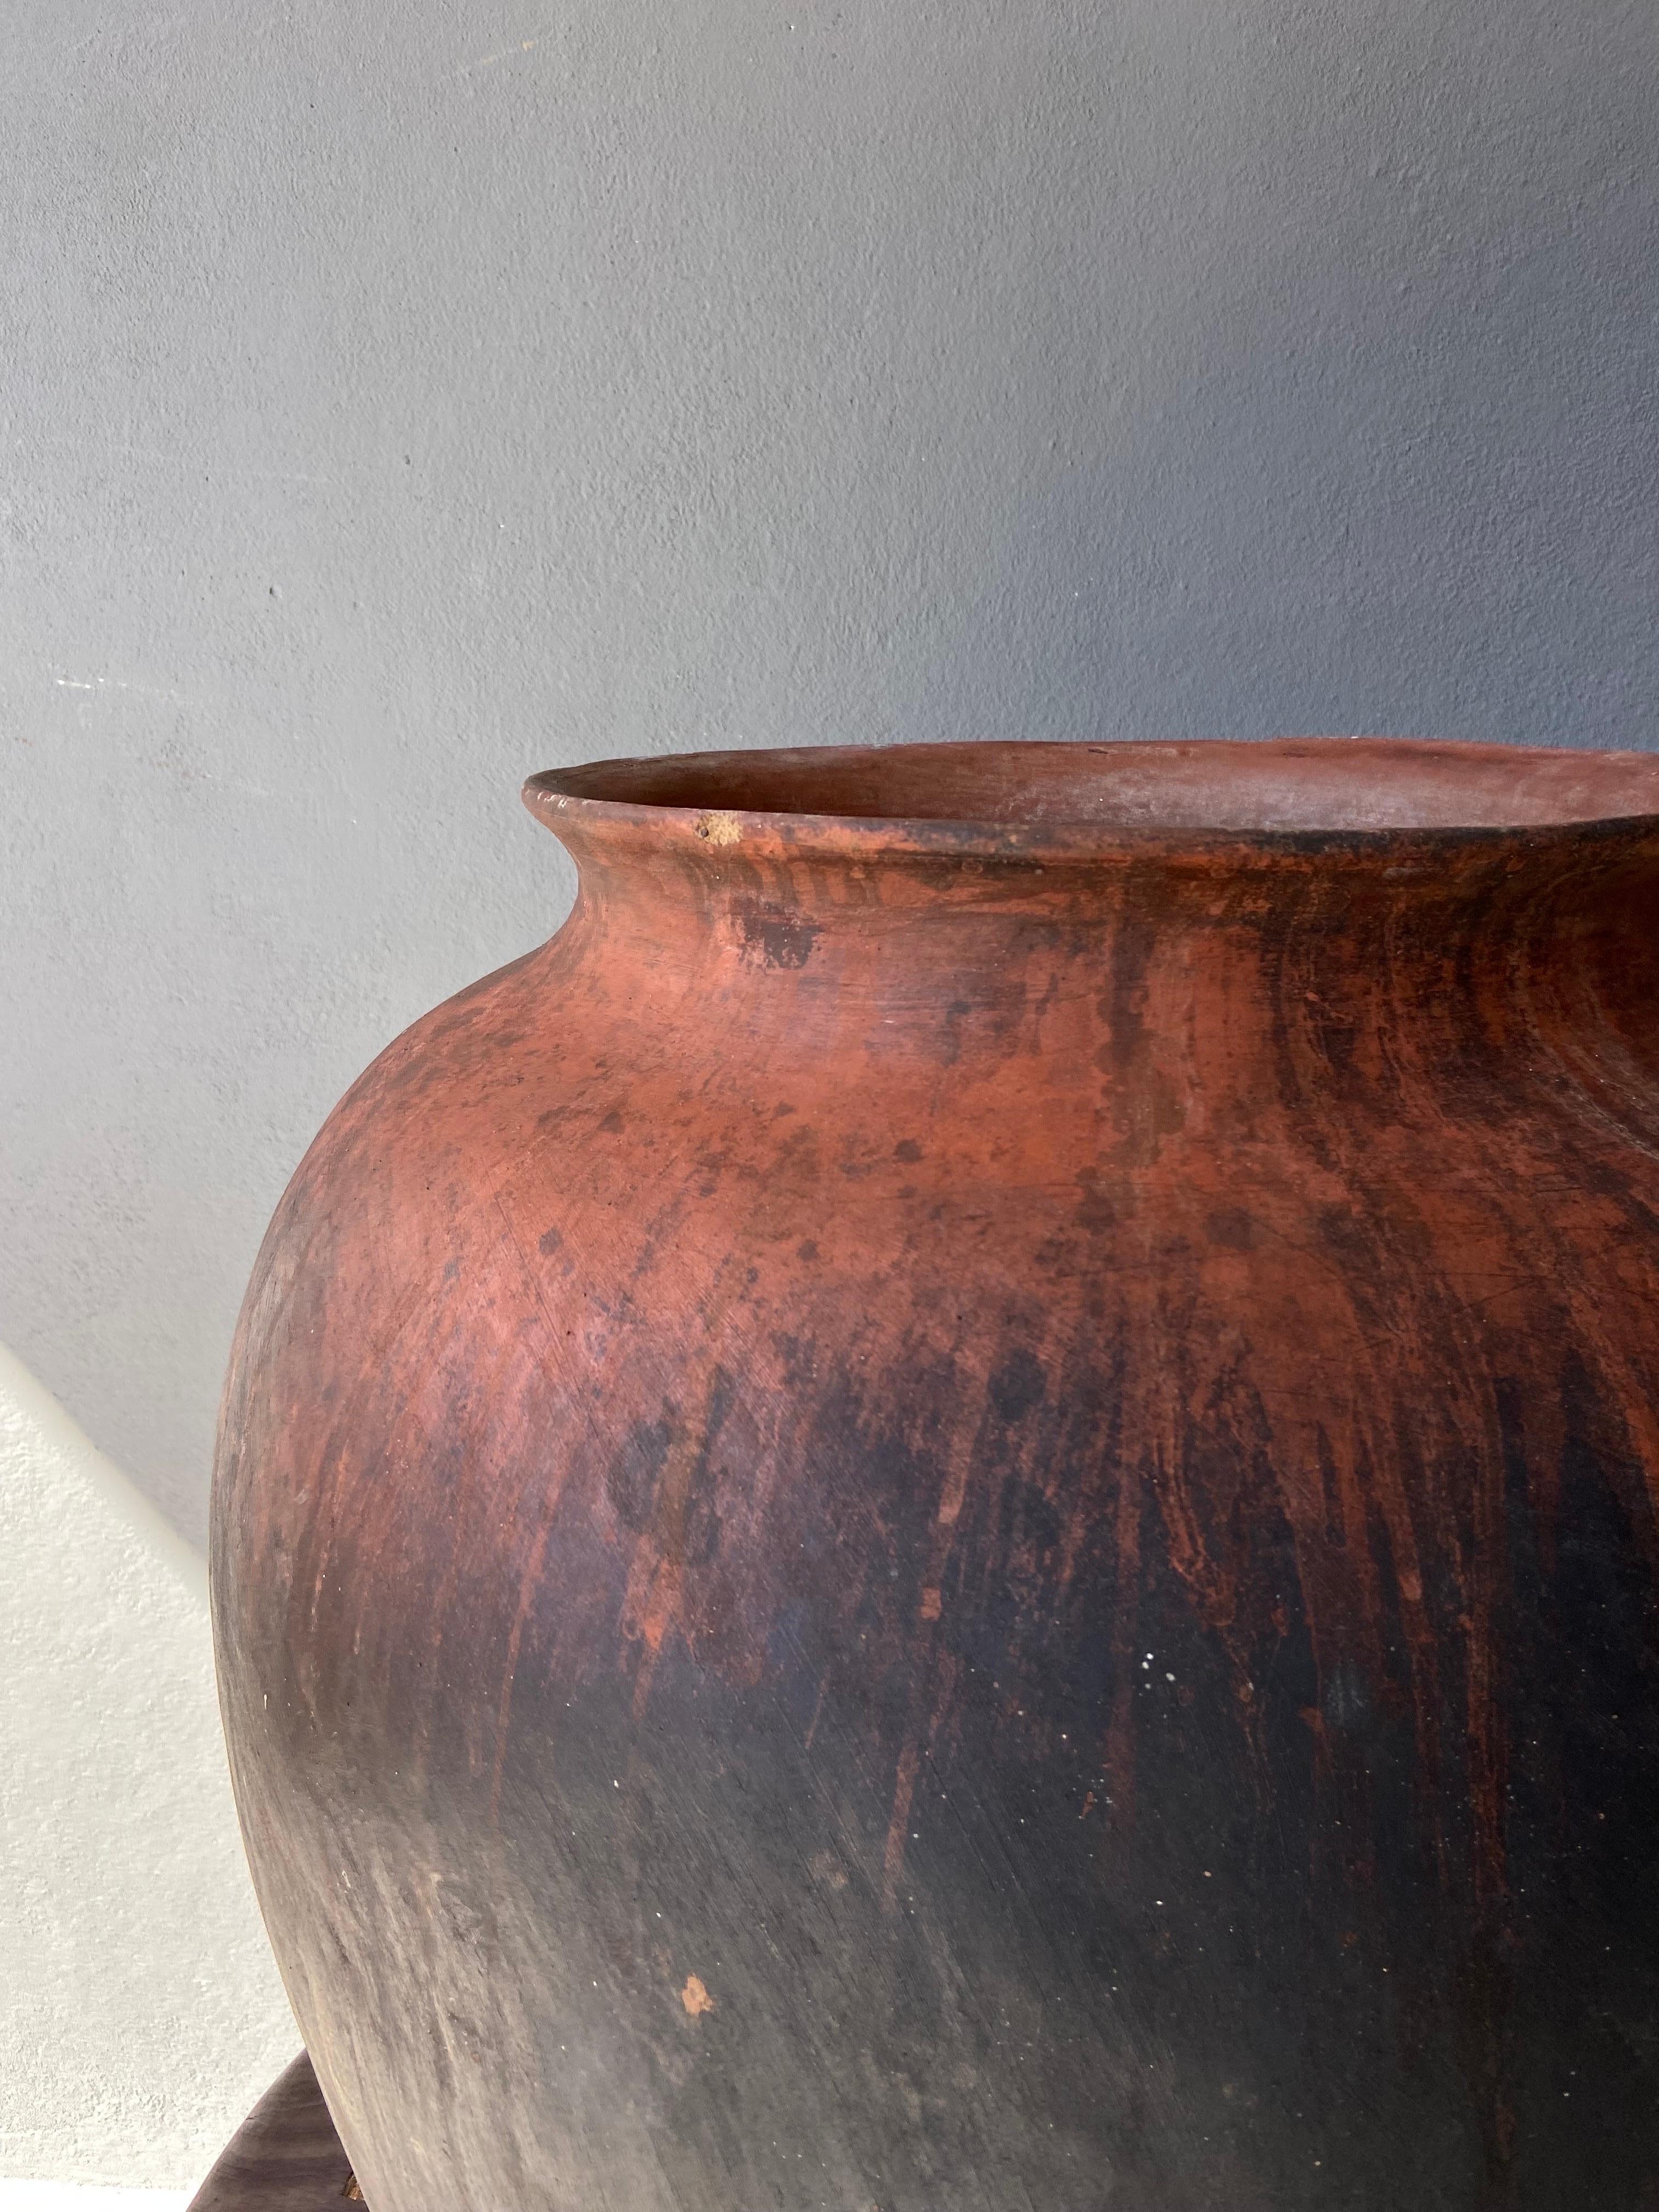 Ceramic Mid 20th Century Terracotta Water Pot From Mexico